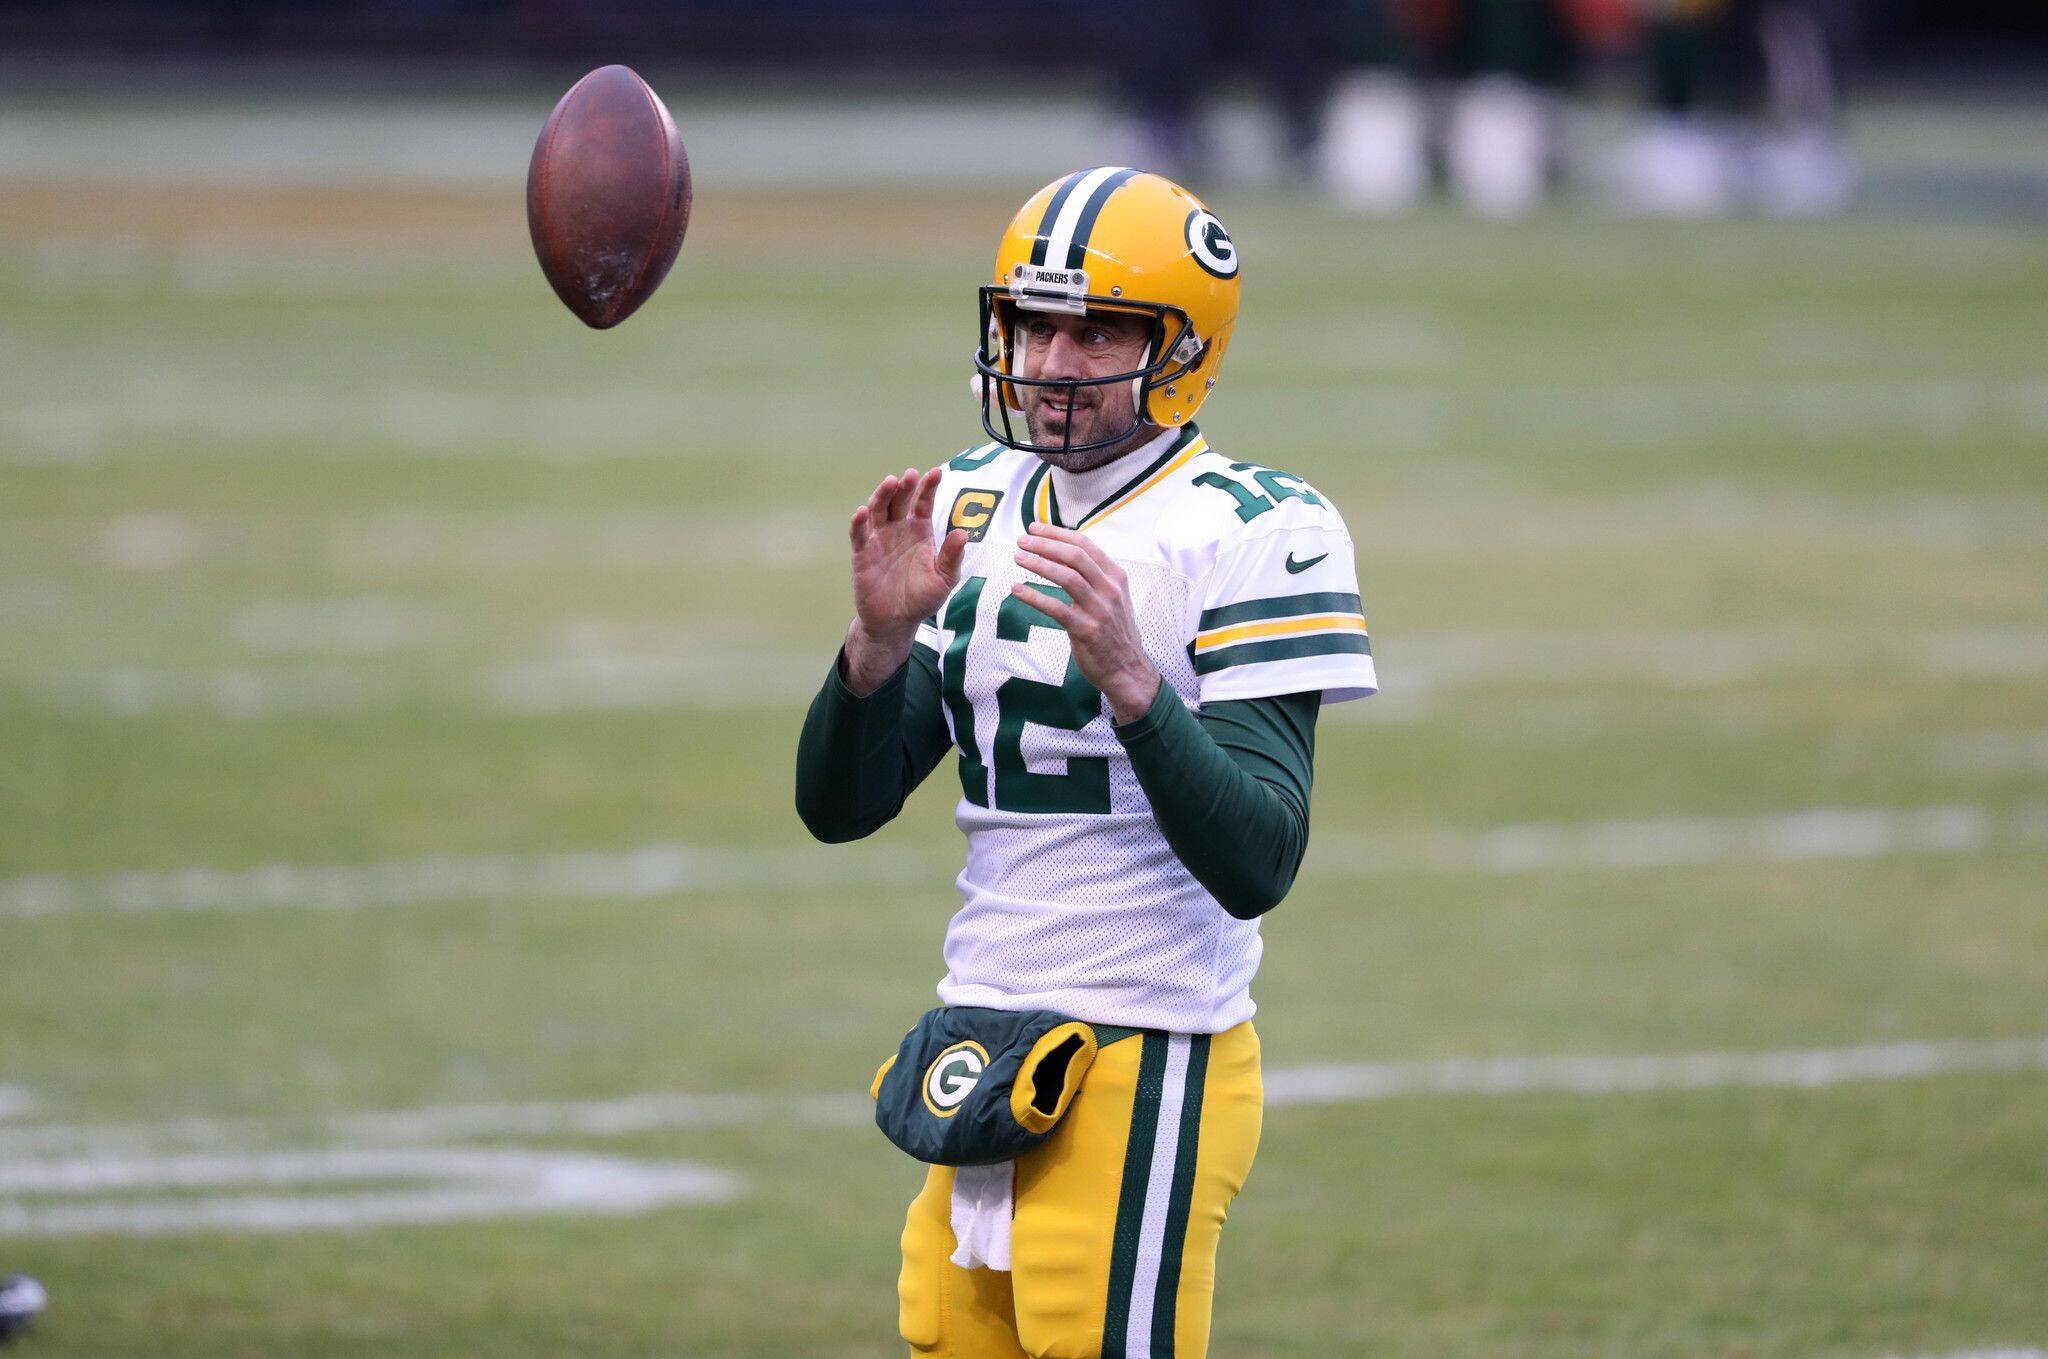 June 8, 2021: Green Bay Packers quarterback Aaron Rodgers warms up for a game against the Chicago Bears at Soldier Field